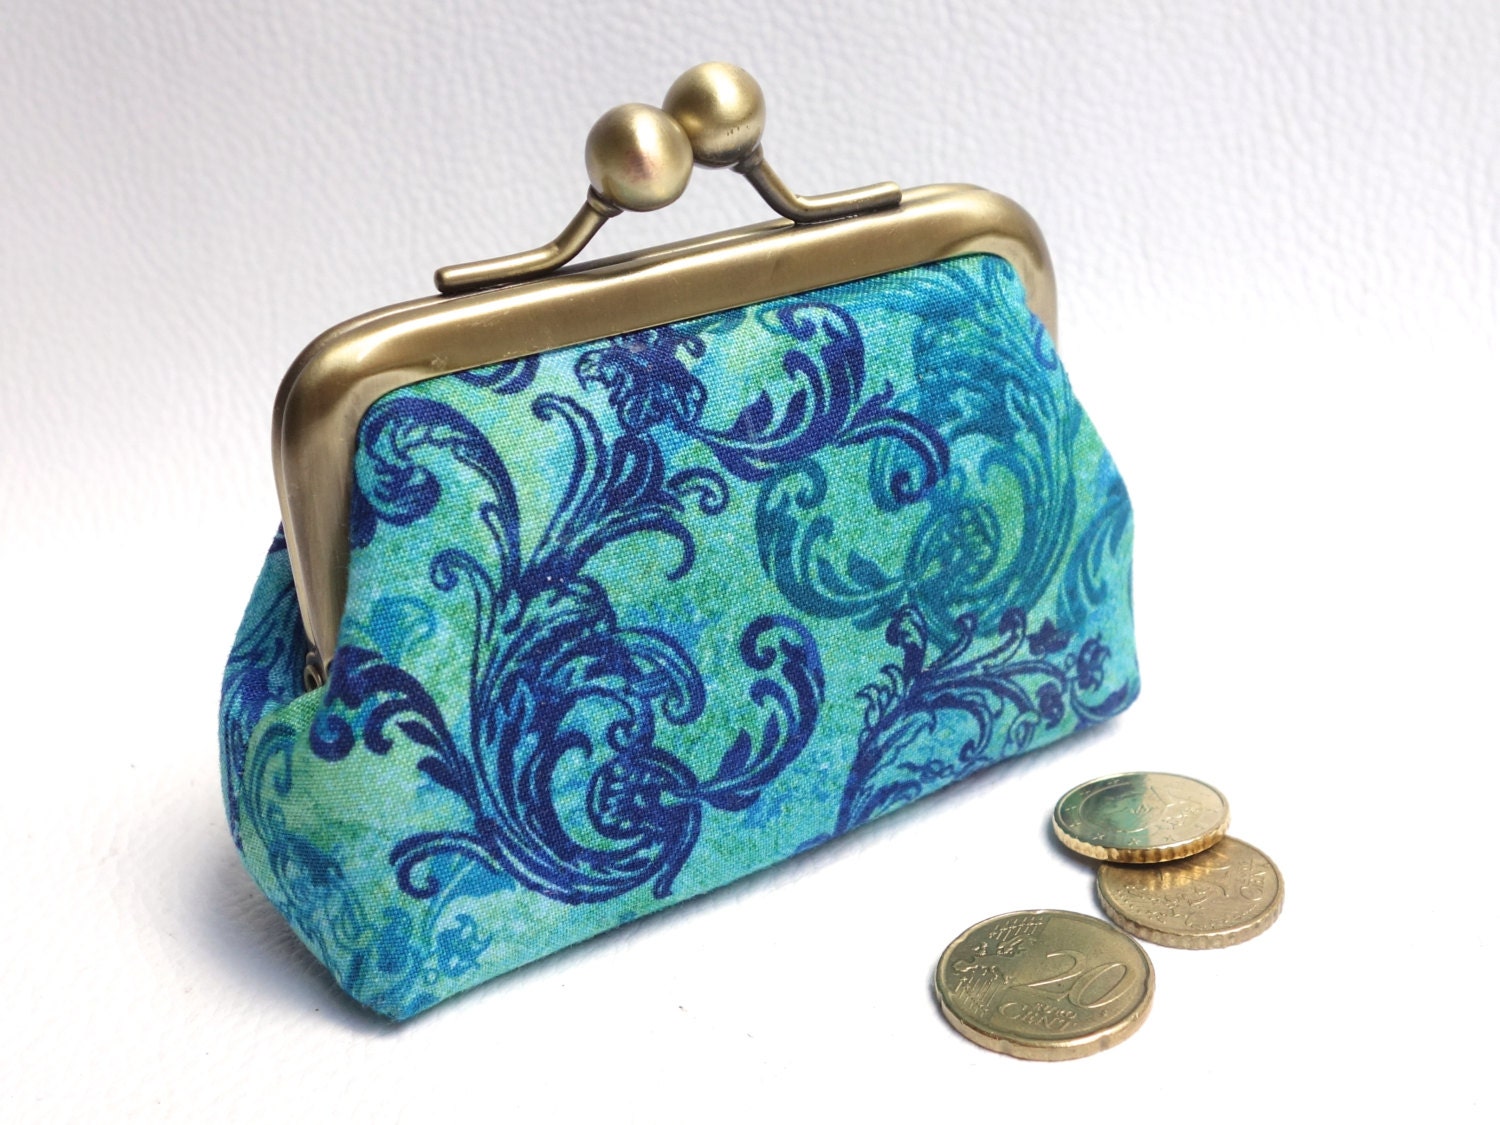 Kisslock frame change purse/ Coin purse with clasp / Navy